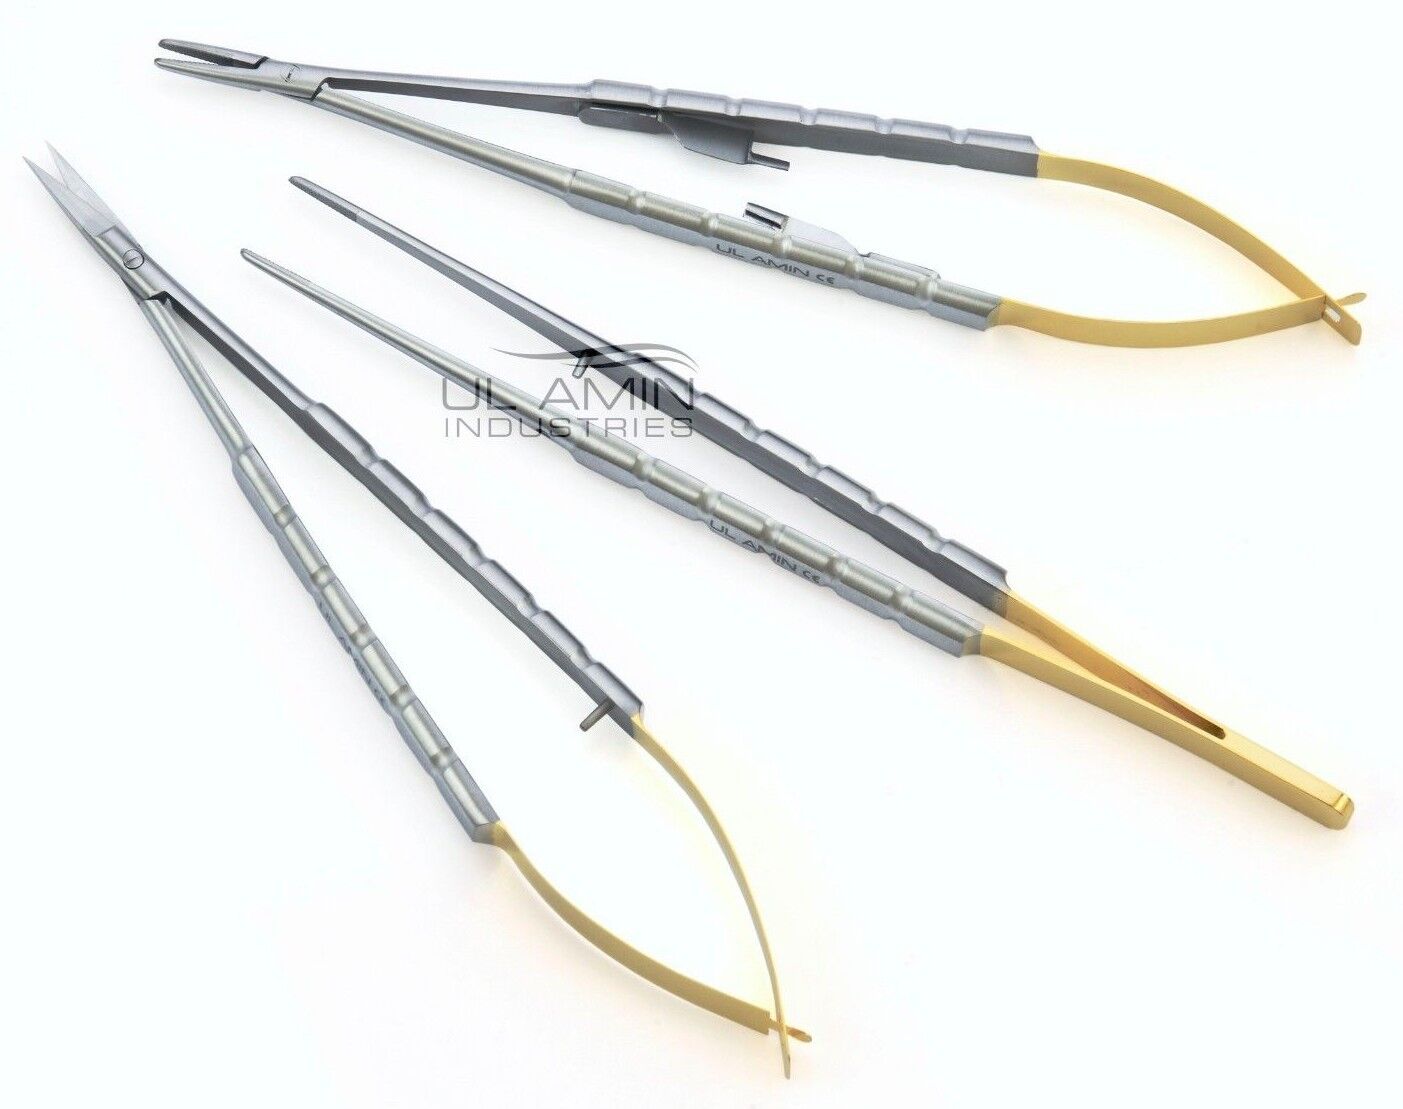 3 TC Castroviejo Needle Holder Scissor Forceps 18cm Dental Surgical Instrument Ul Amin Industries Does Not Apply